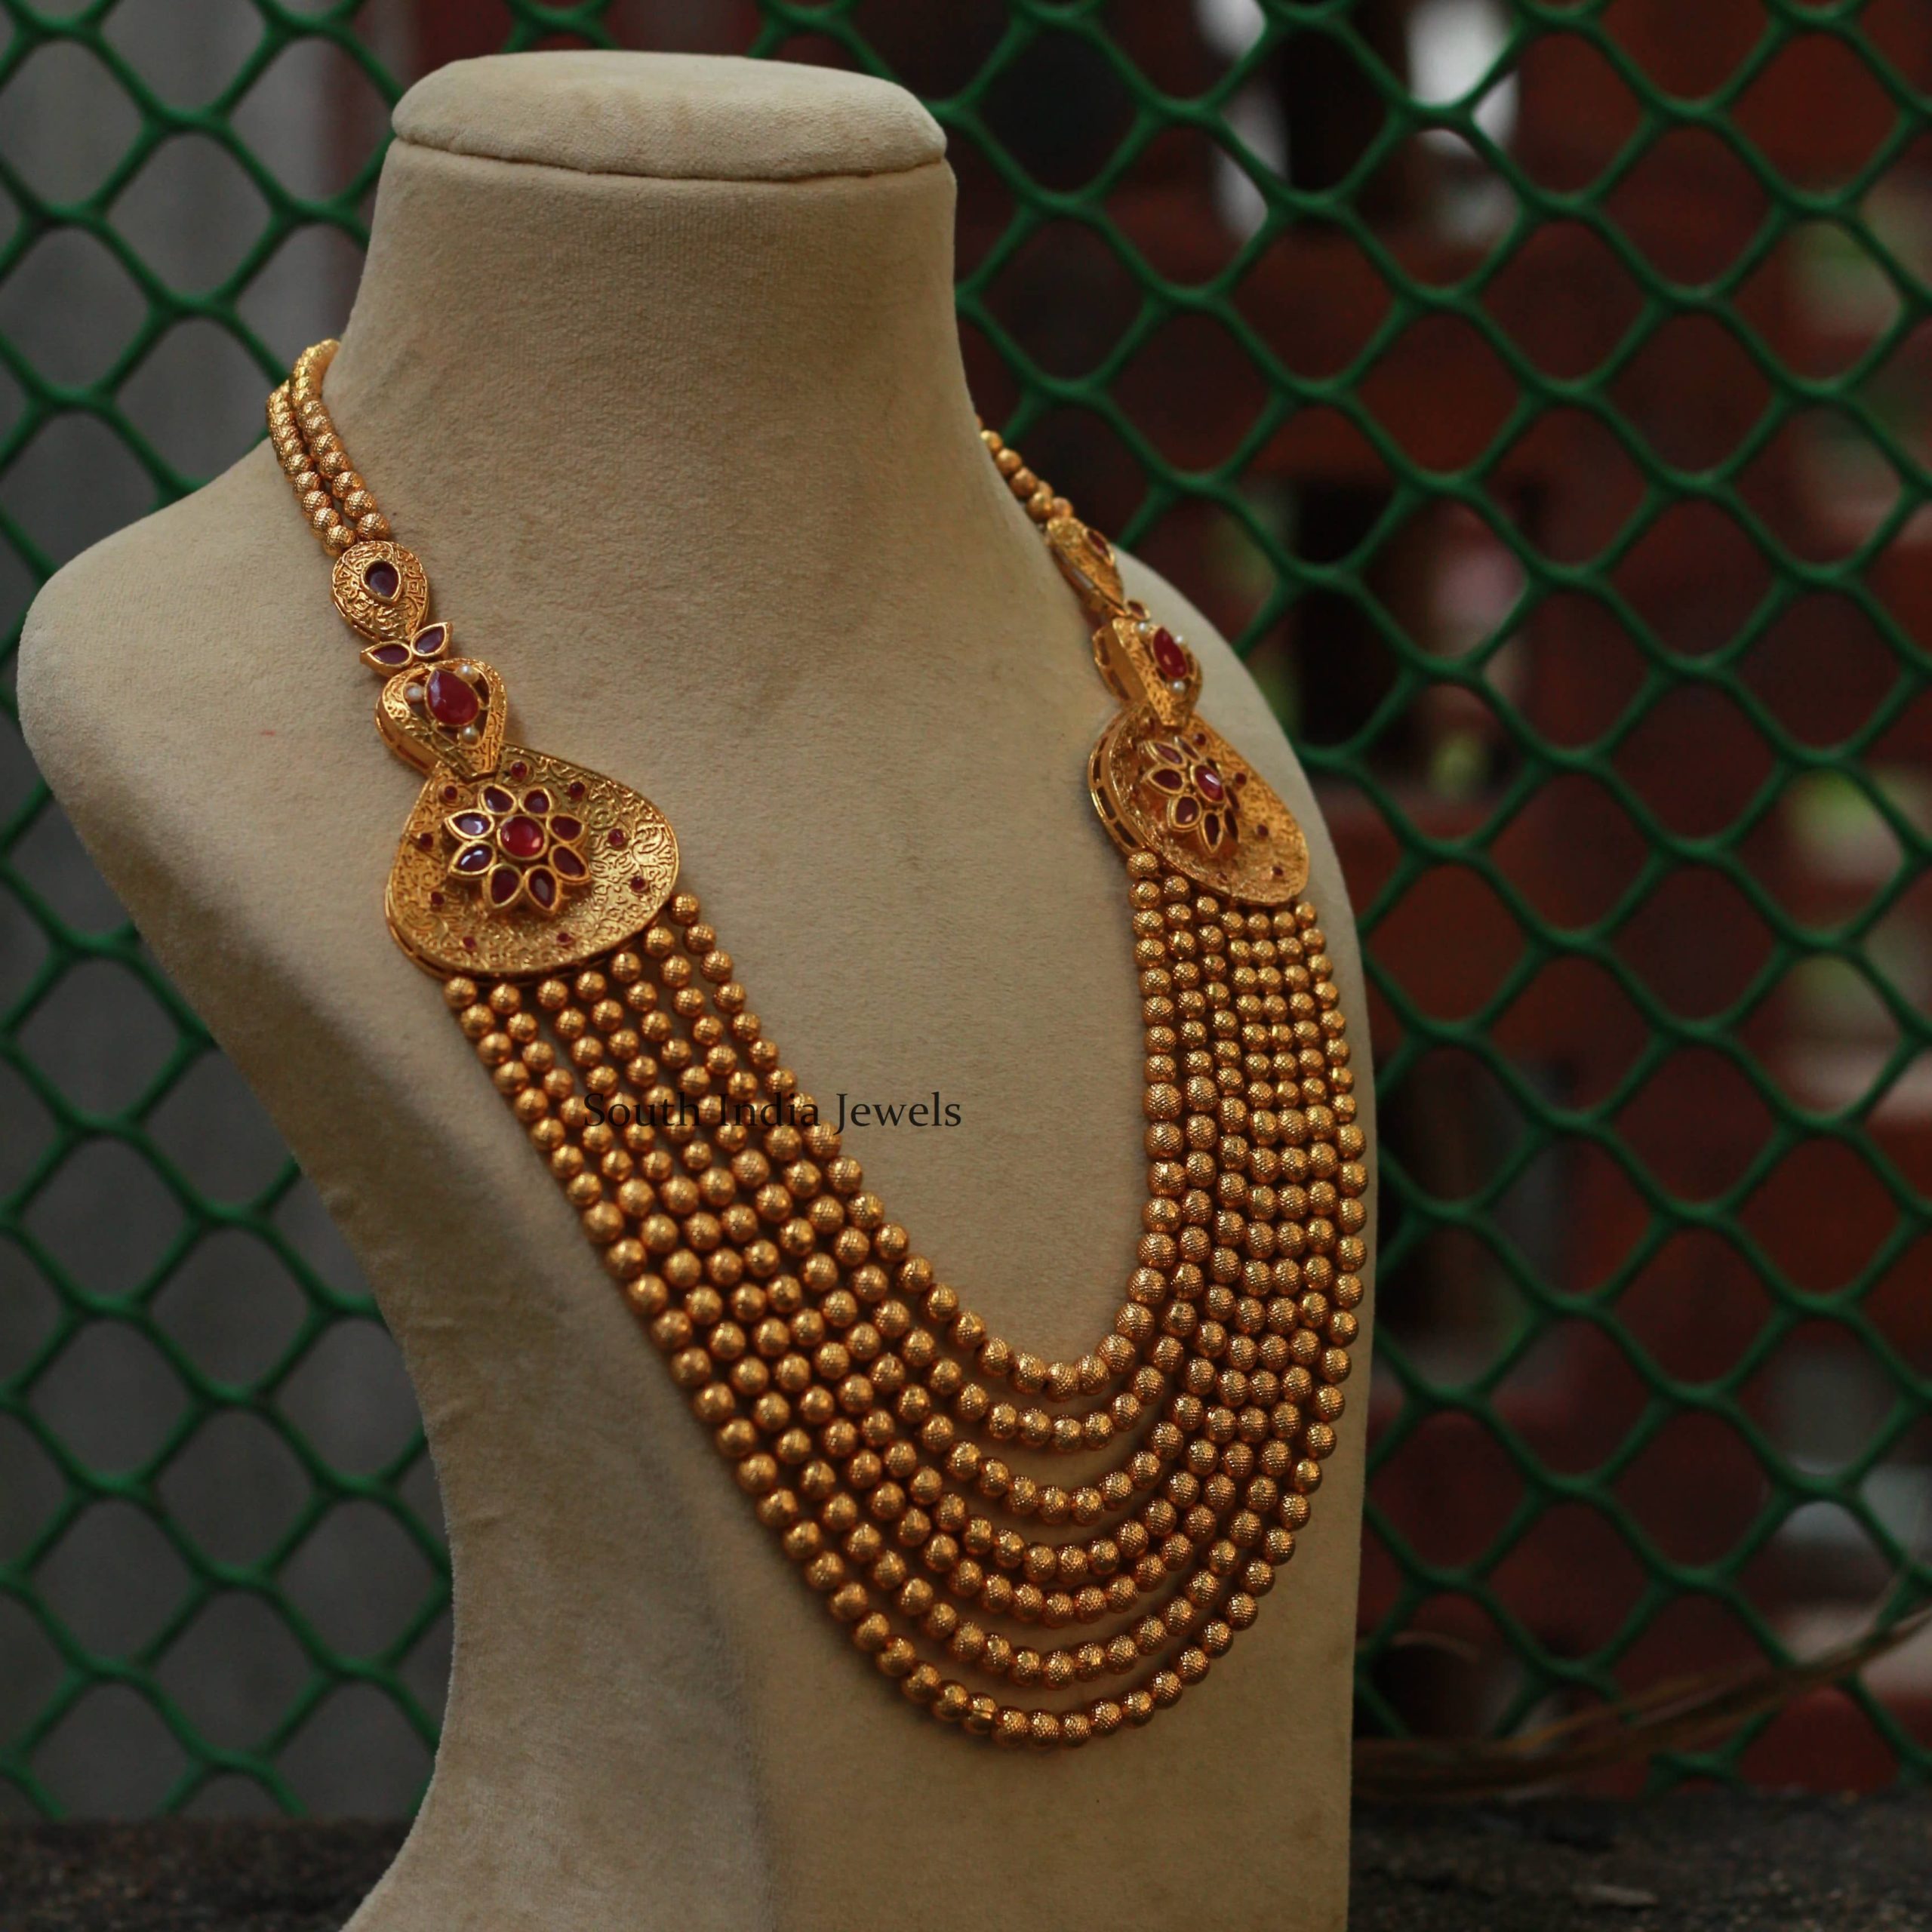 Antique Layered Necklace